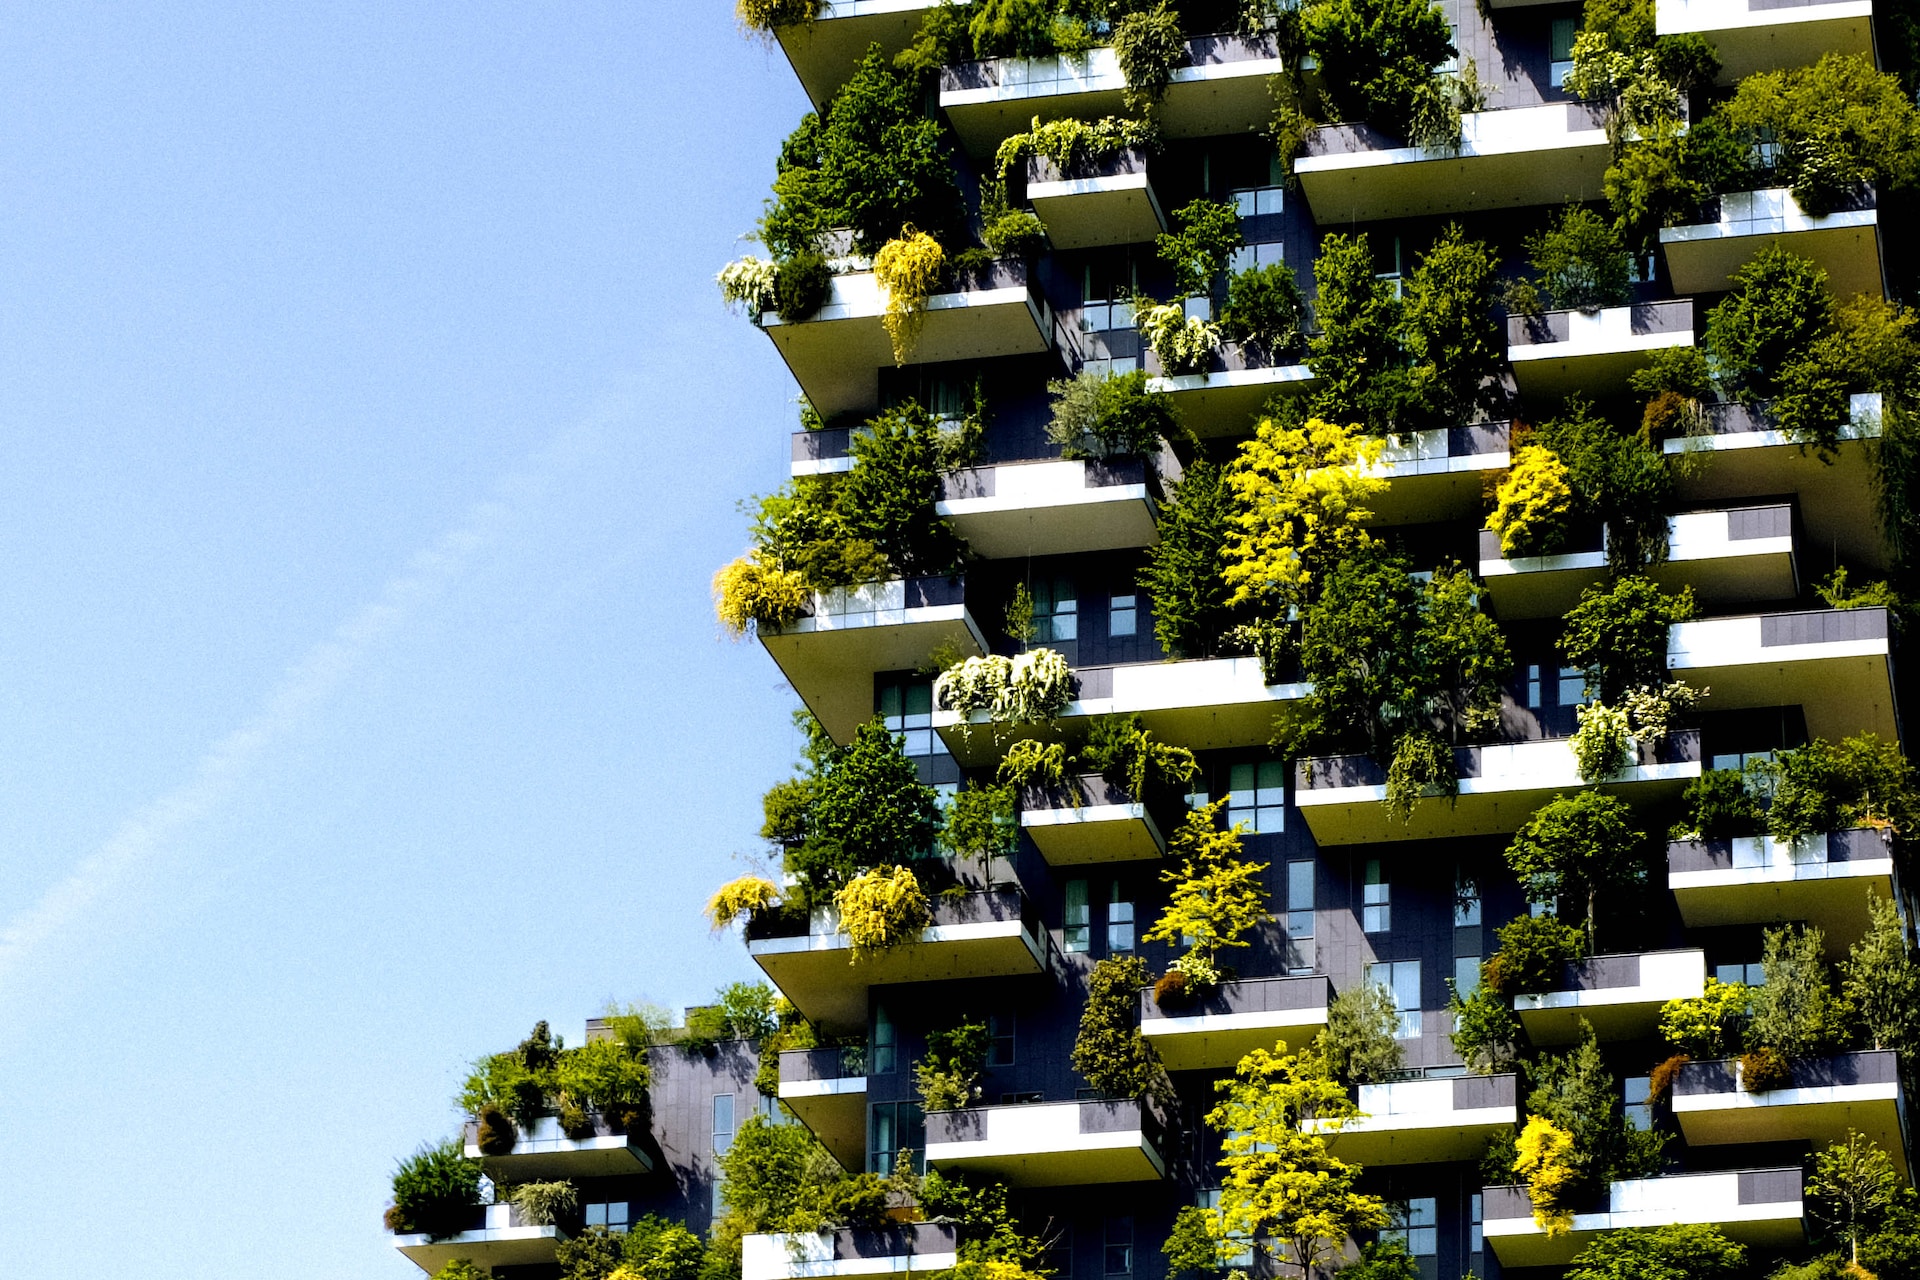 The Trudo Vertical Forest.